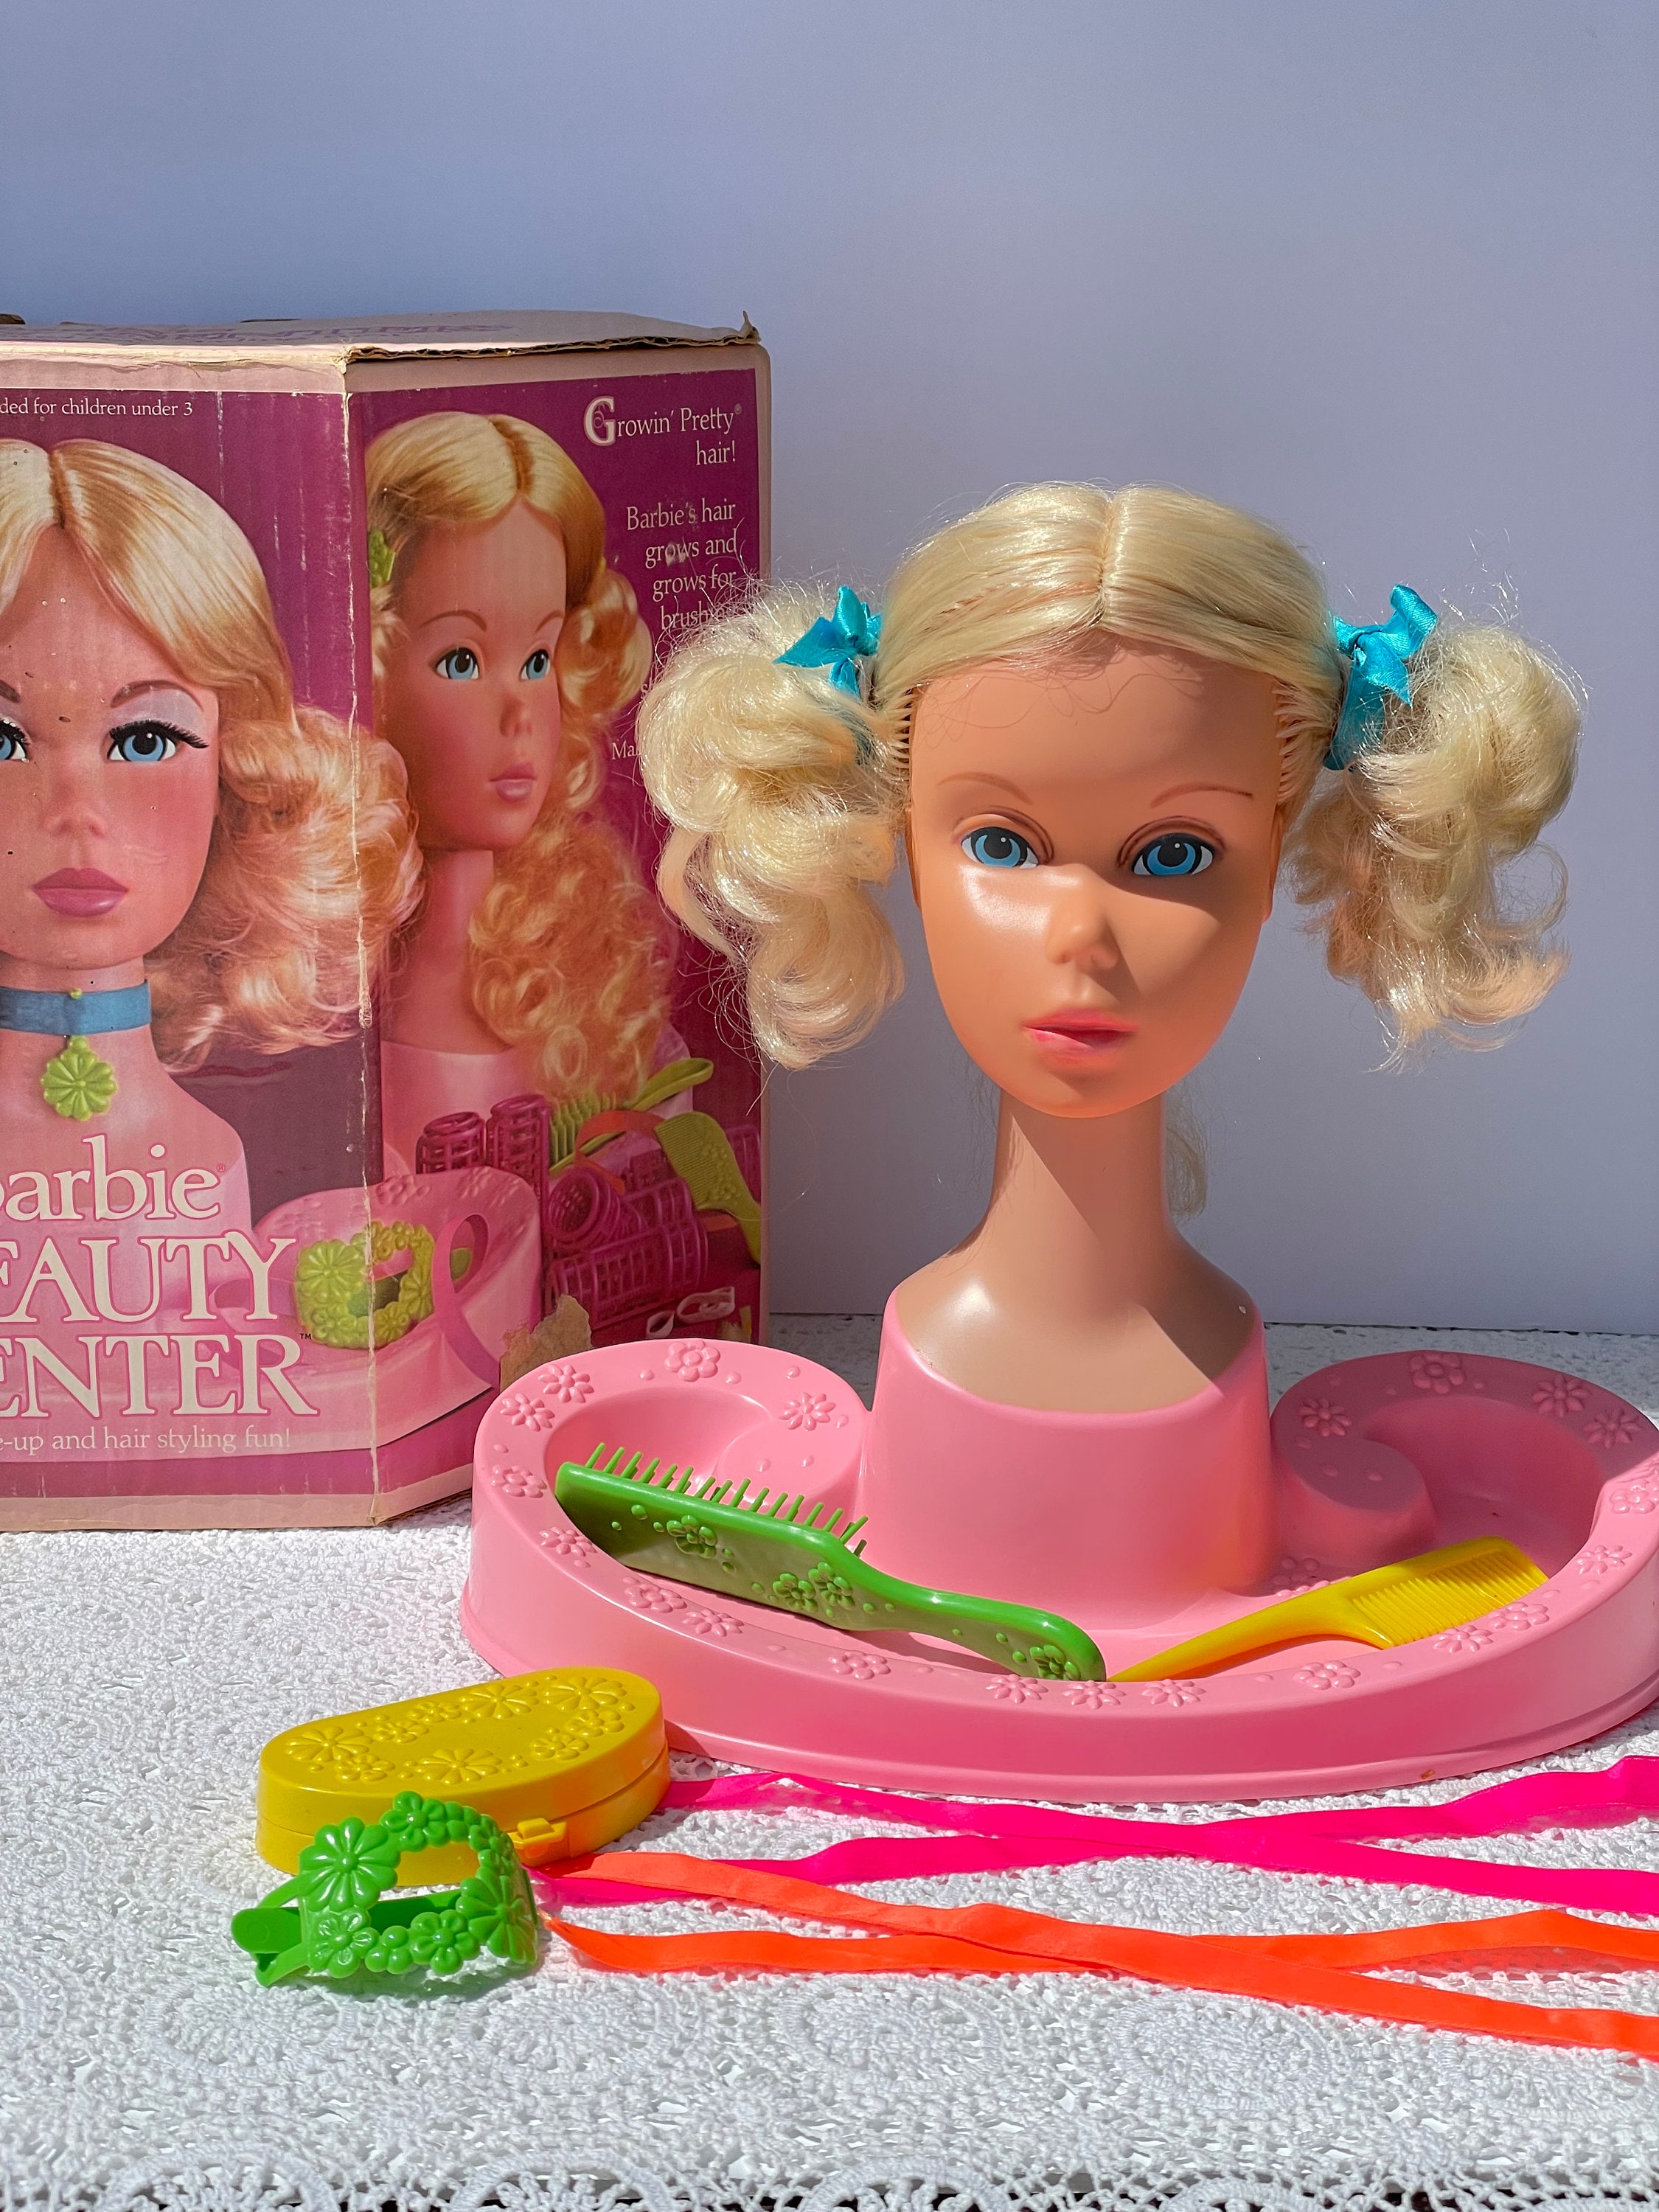 Girls Beauty Salon Set Pretend Play Stylist Hair Cutting Kit Hairdresser  Toys with Hair Dryer, Scissors, Barber Apron and Styling Accessories(Not  Real Hairdresser Toys, Hairdresser Toys Model)